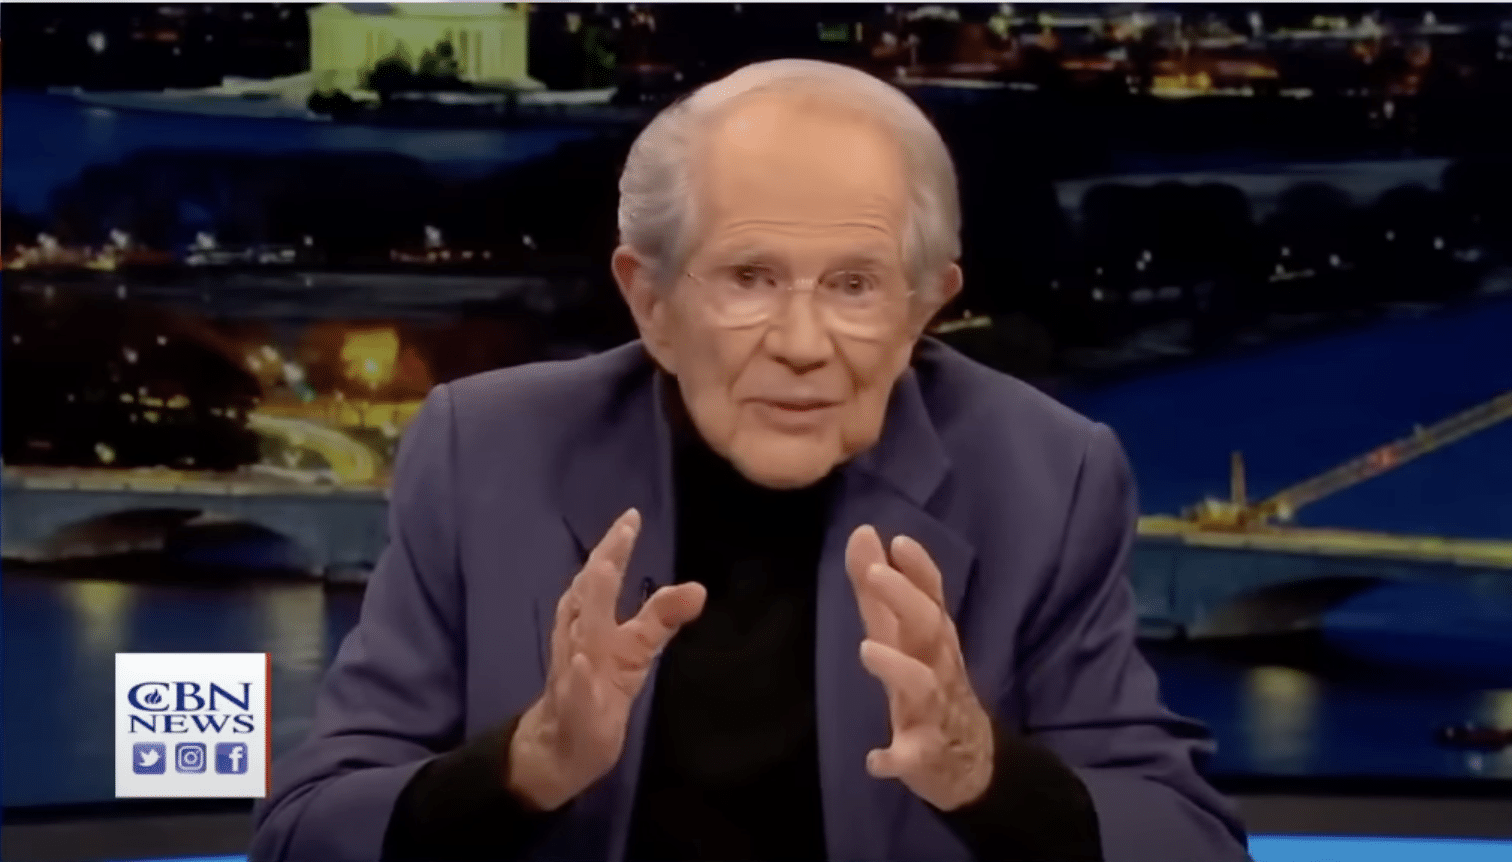 CBN and 700 Club Founder Pat Robertson, dead at 93